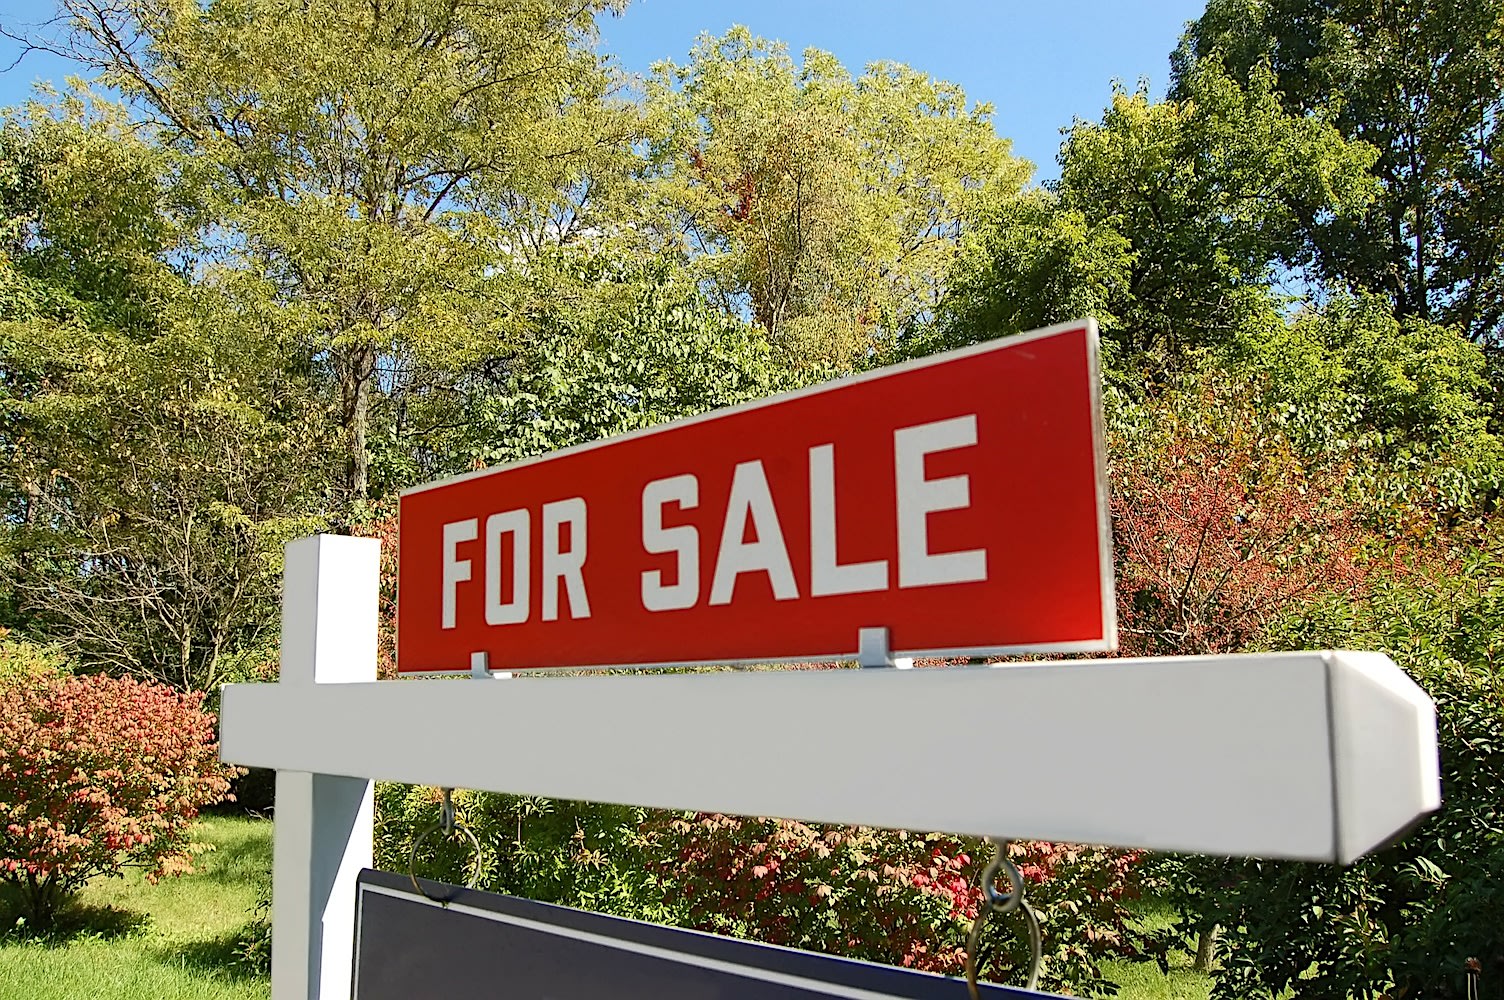 A "for sale" sign of the kind used in real estate with trees in the background